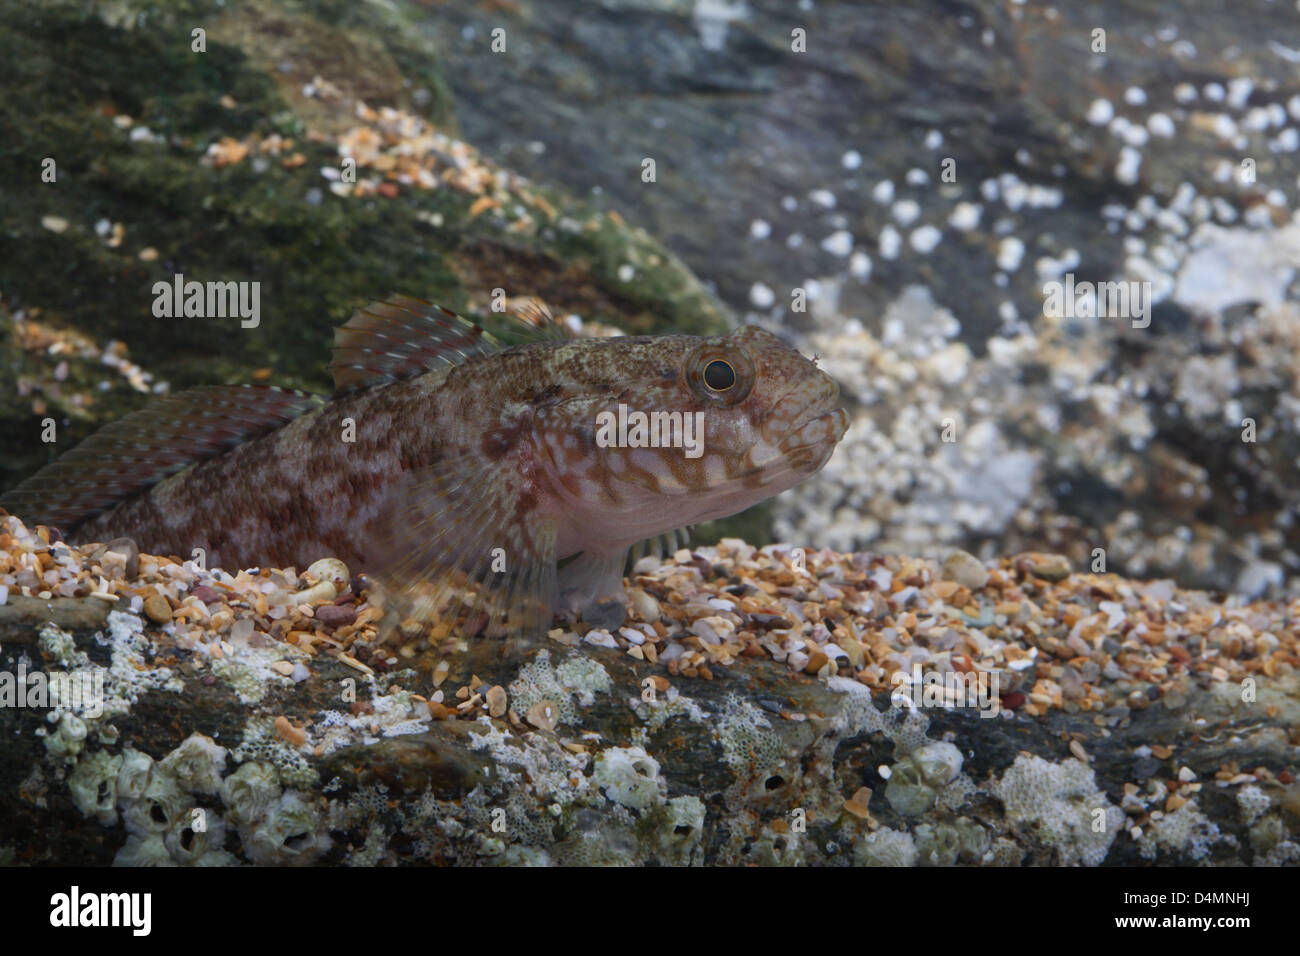 Rock Goby on barnacle covered rocks in aquarium Stock Photo